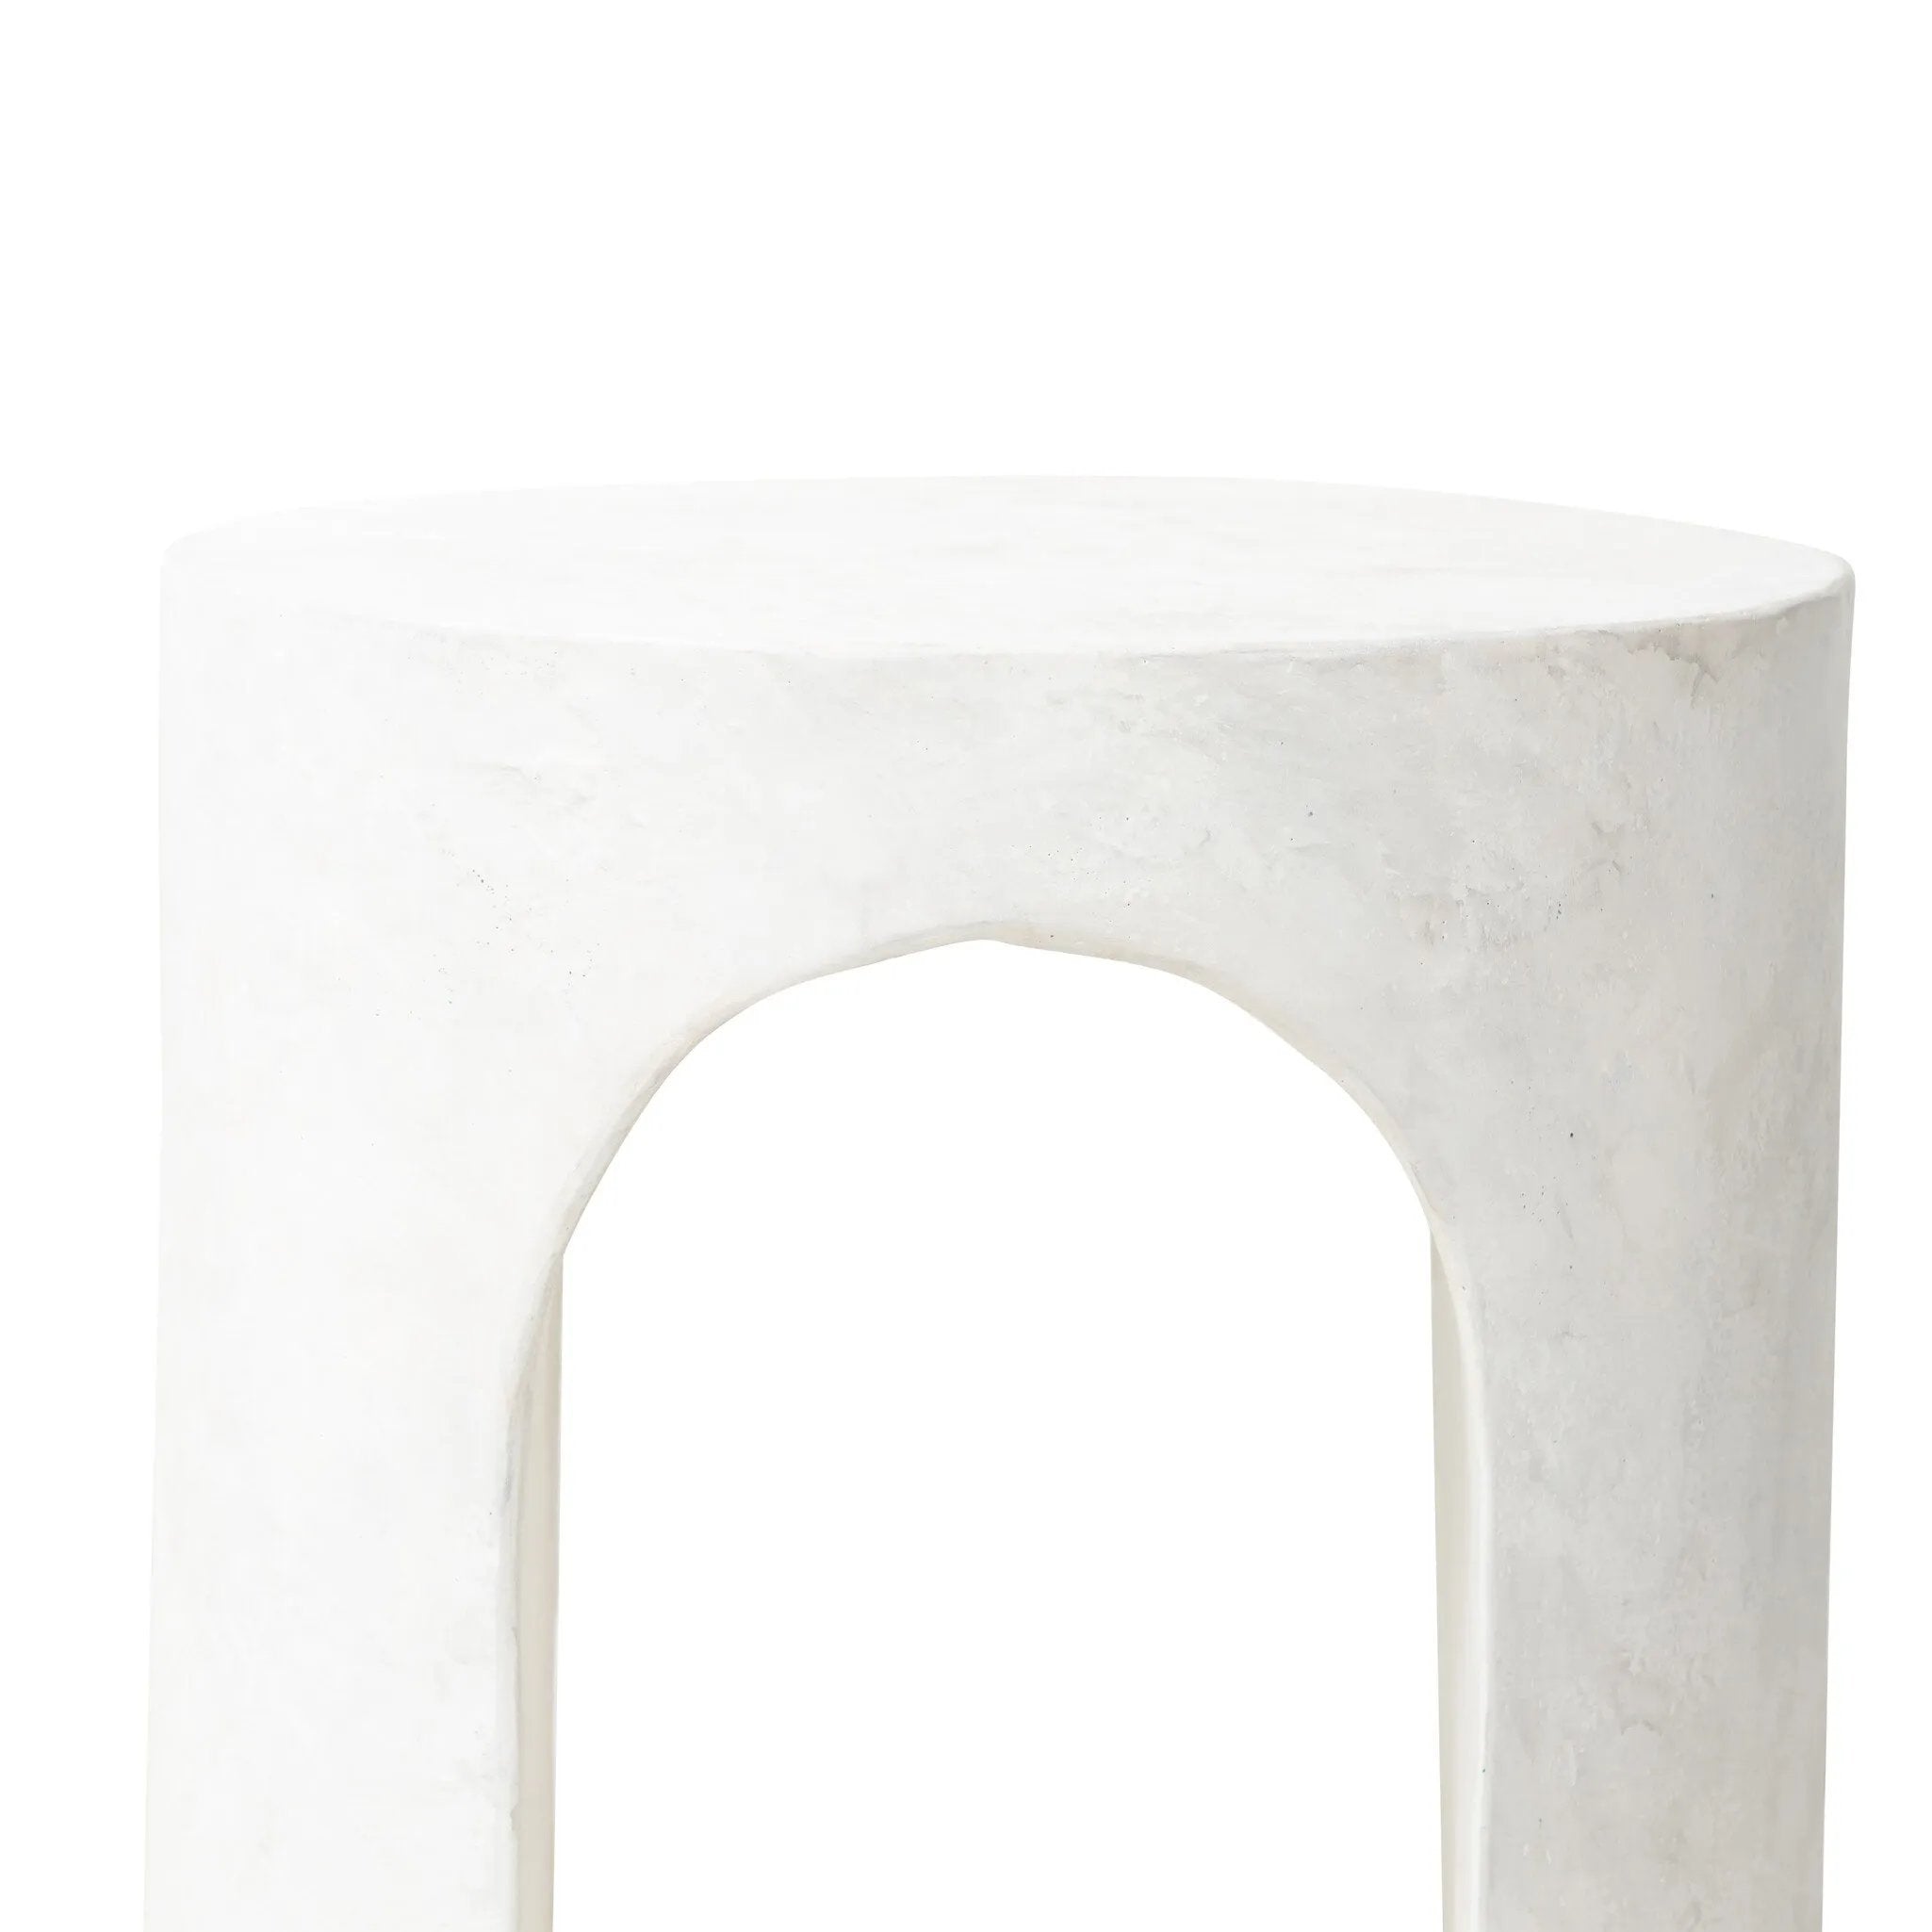 Made from textured white concrete, a cylinder shaped end table features a pill-shaped cutout for a light look. Subtle mottling adds a hint of texture.Collection: Chandle Amethyst Home provides interior design, new home construction design consulting, vintage area rugs, and lighting in the Omaha metro area.